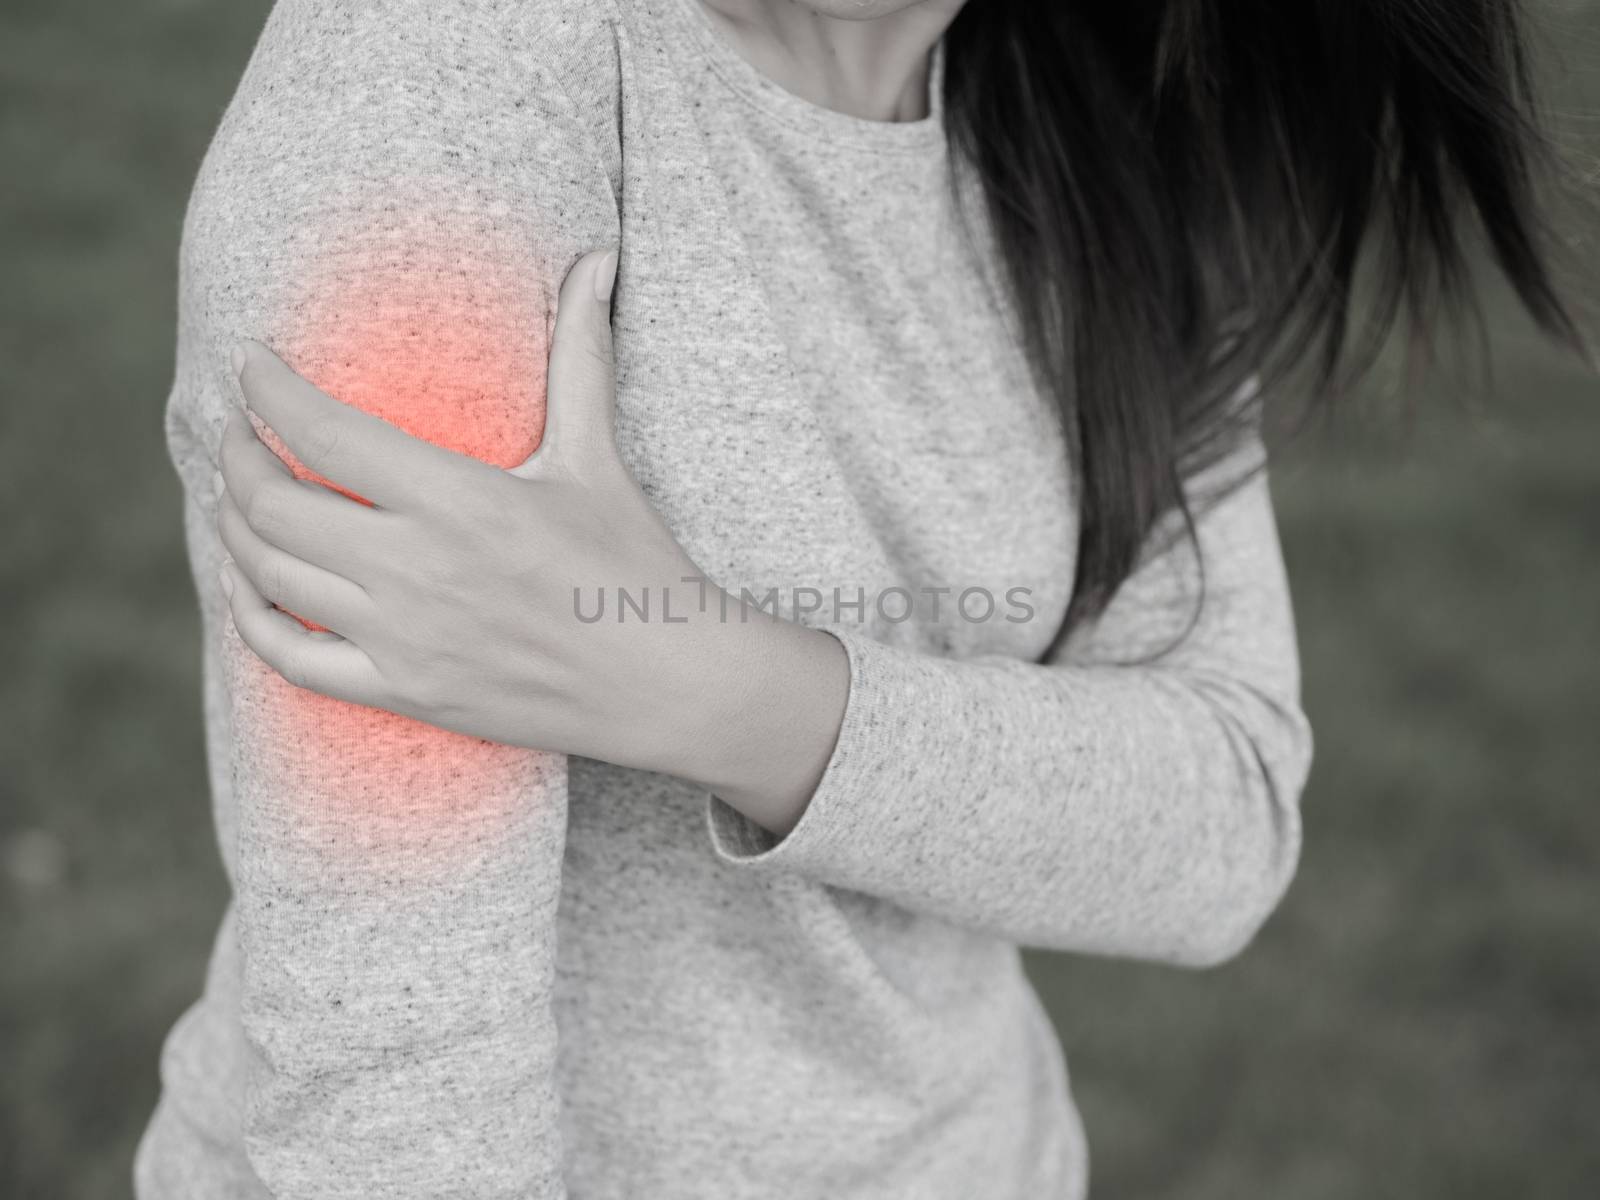 Closeup female's arm pain and injury. Health care and medical concept.